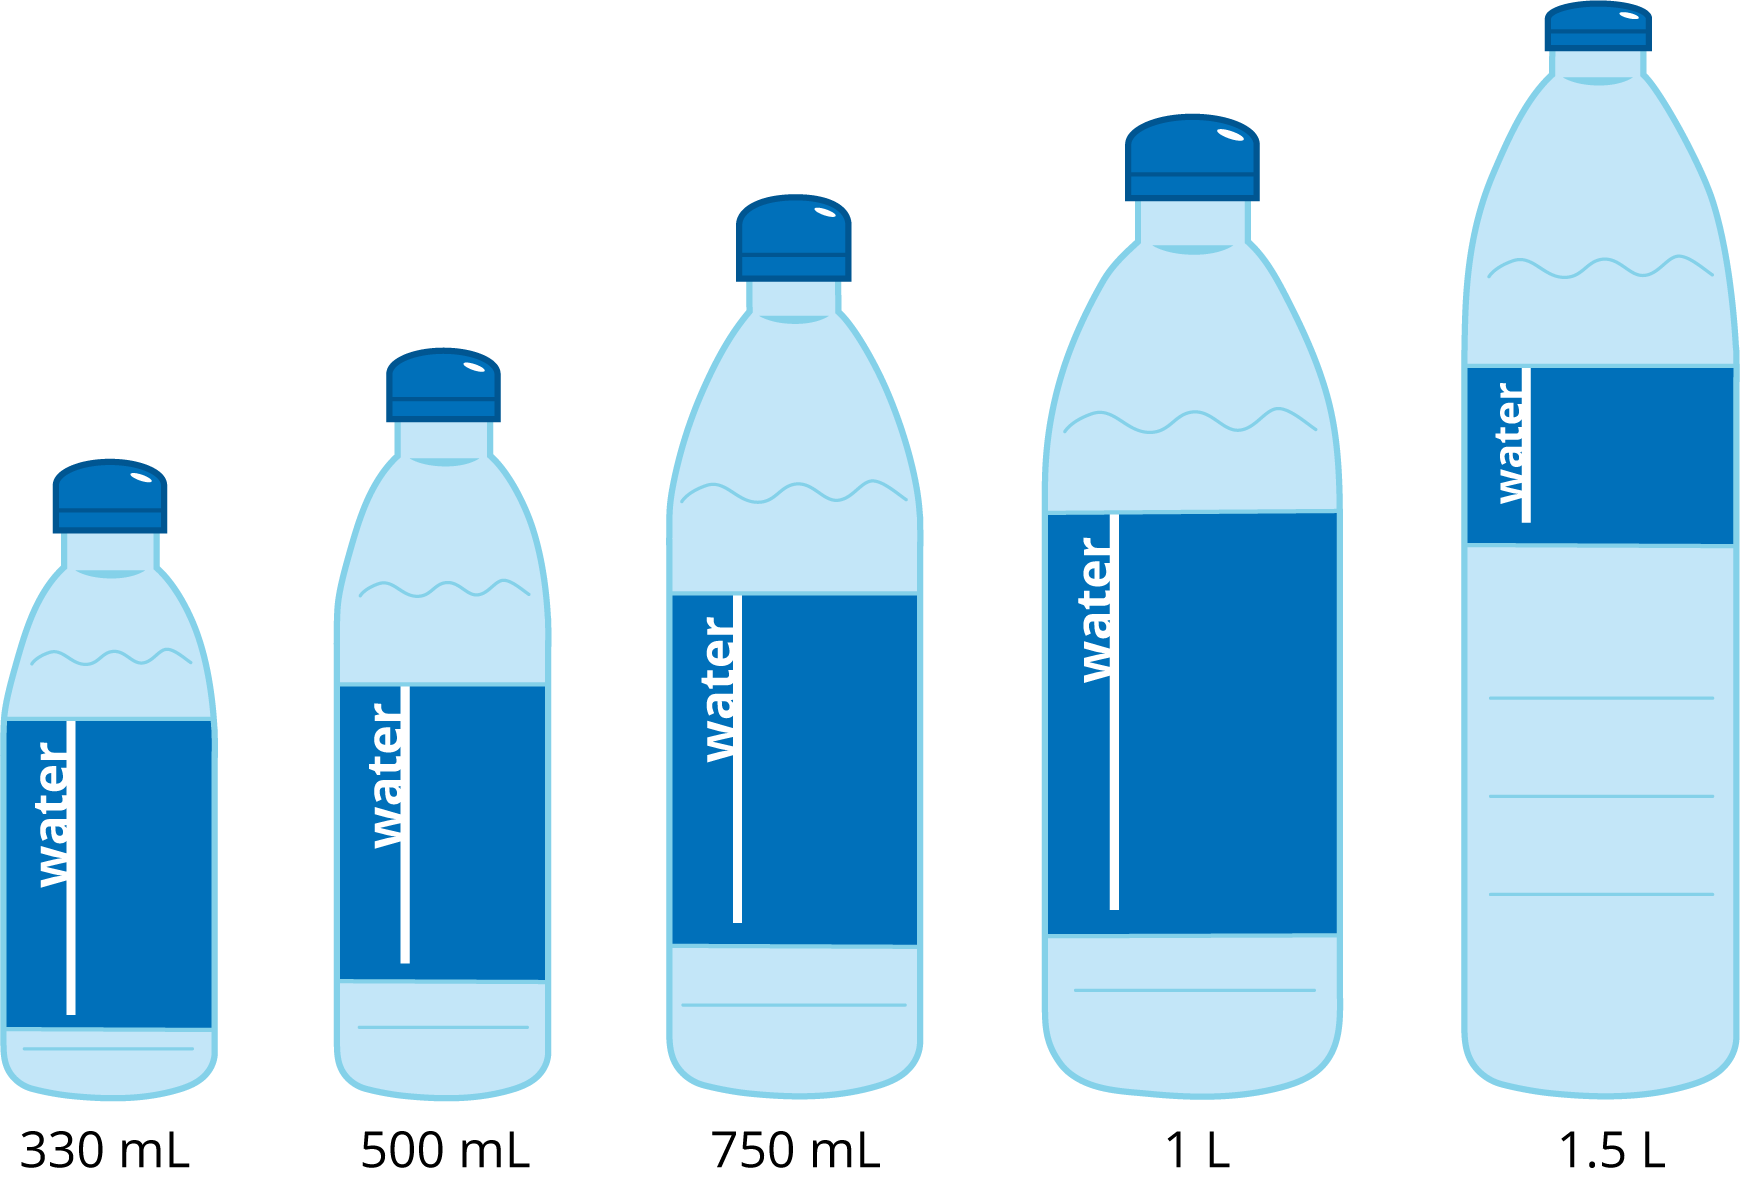 5 water bottles. From left to right, 3 hundred 30 milliliters, 5 hundred milliliters, 7 hundred fifty milliliters, 1 liter, 1 and 5 tenths liters. 